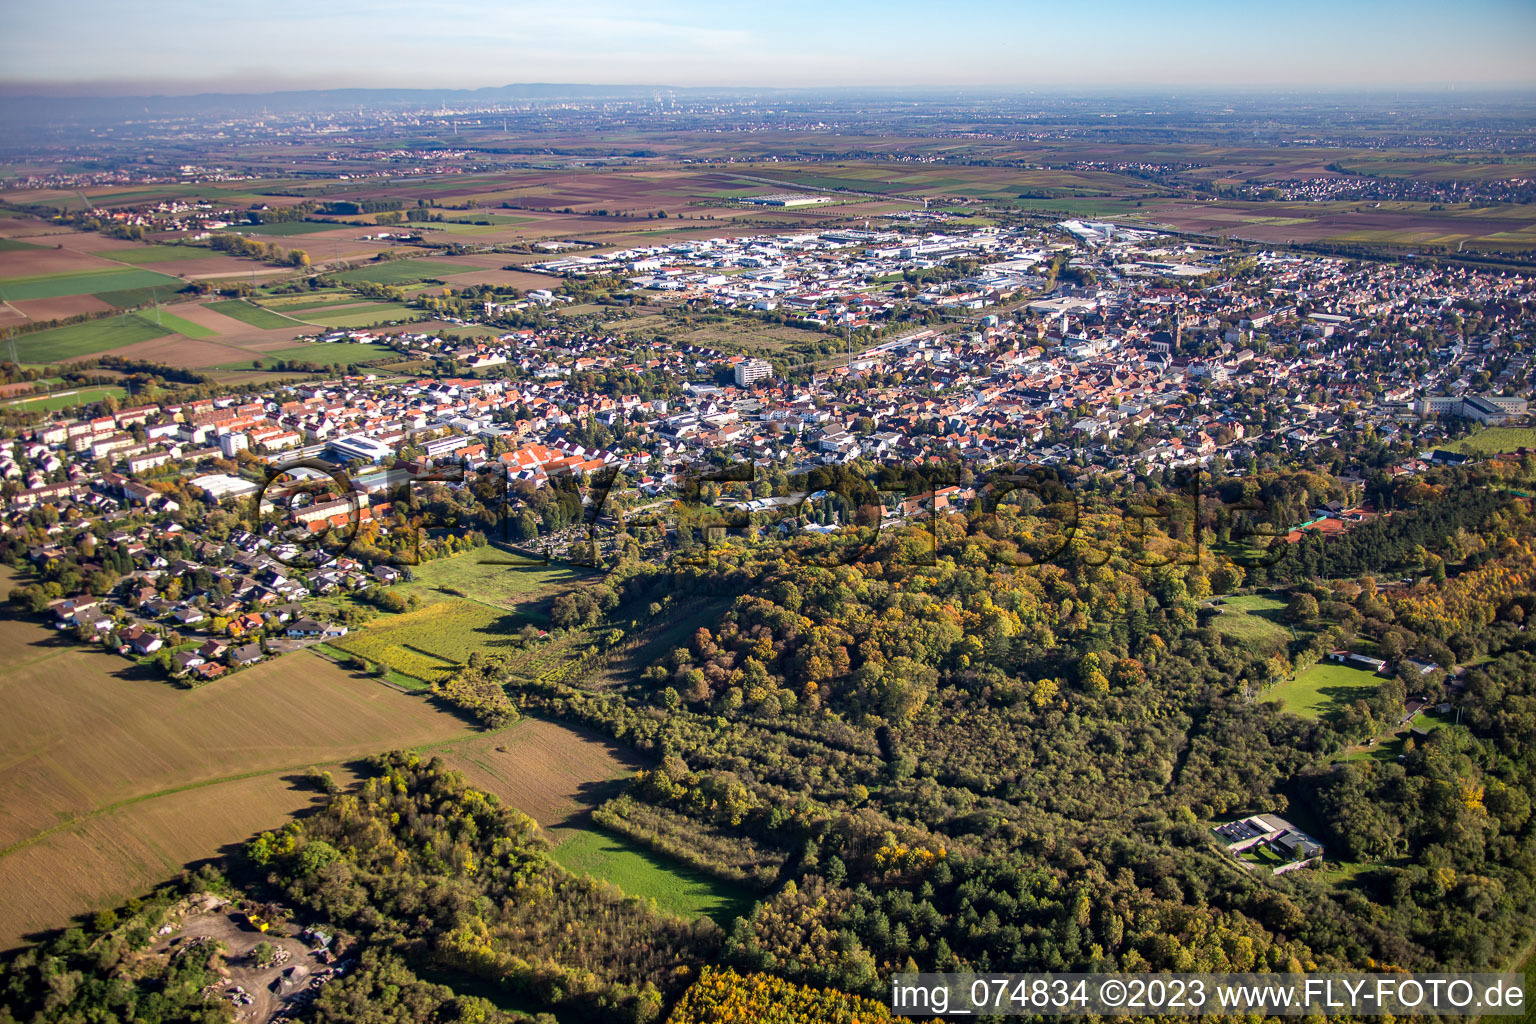 Aerial view of From northwest in Grünstadt in the state Rhineland-Palatinate, Germany